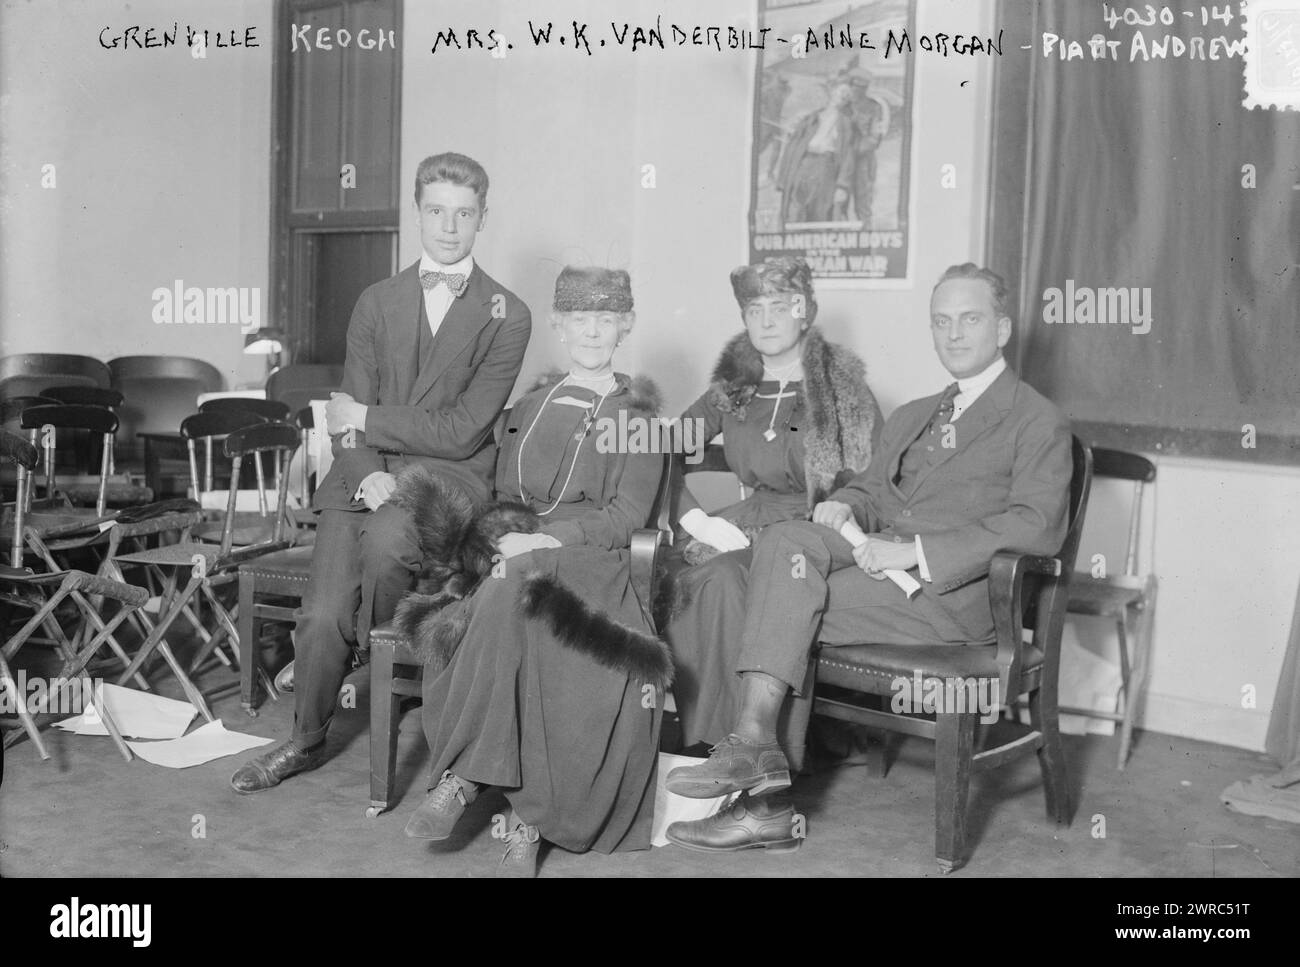 Grenville Keogh, Mrs. W.K. Vanderbilt, Anne Morgan, Piatt Andrew, Photograph shows Grenville Keogh, an ambulance driver for the American Ambulance Field Service and Anne Harriman Sands Rutherfurd (Mrs. William Kissam Vanderbilt) with others., between ca. 1915 and ca. 1920, Glass negatives, 1 negative: glass Stock Photo